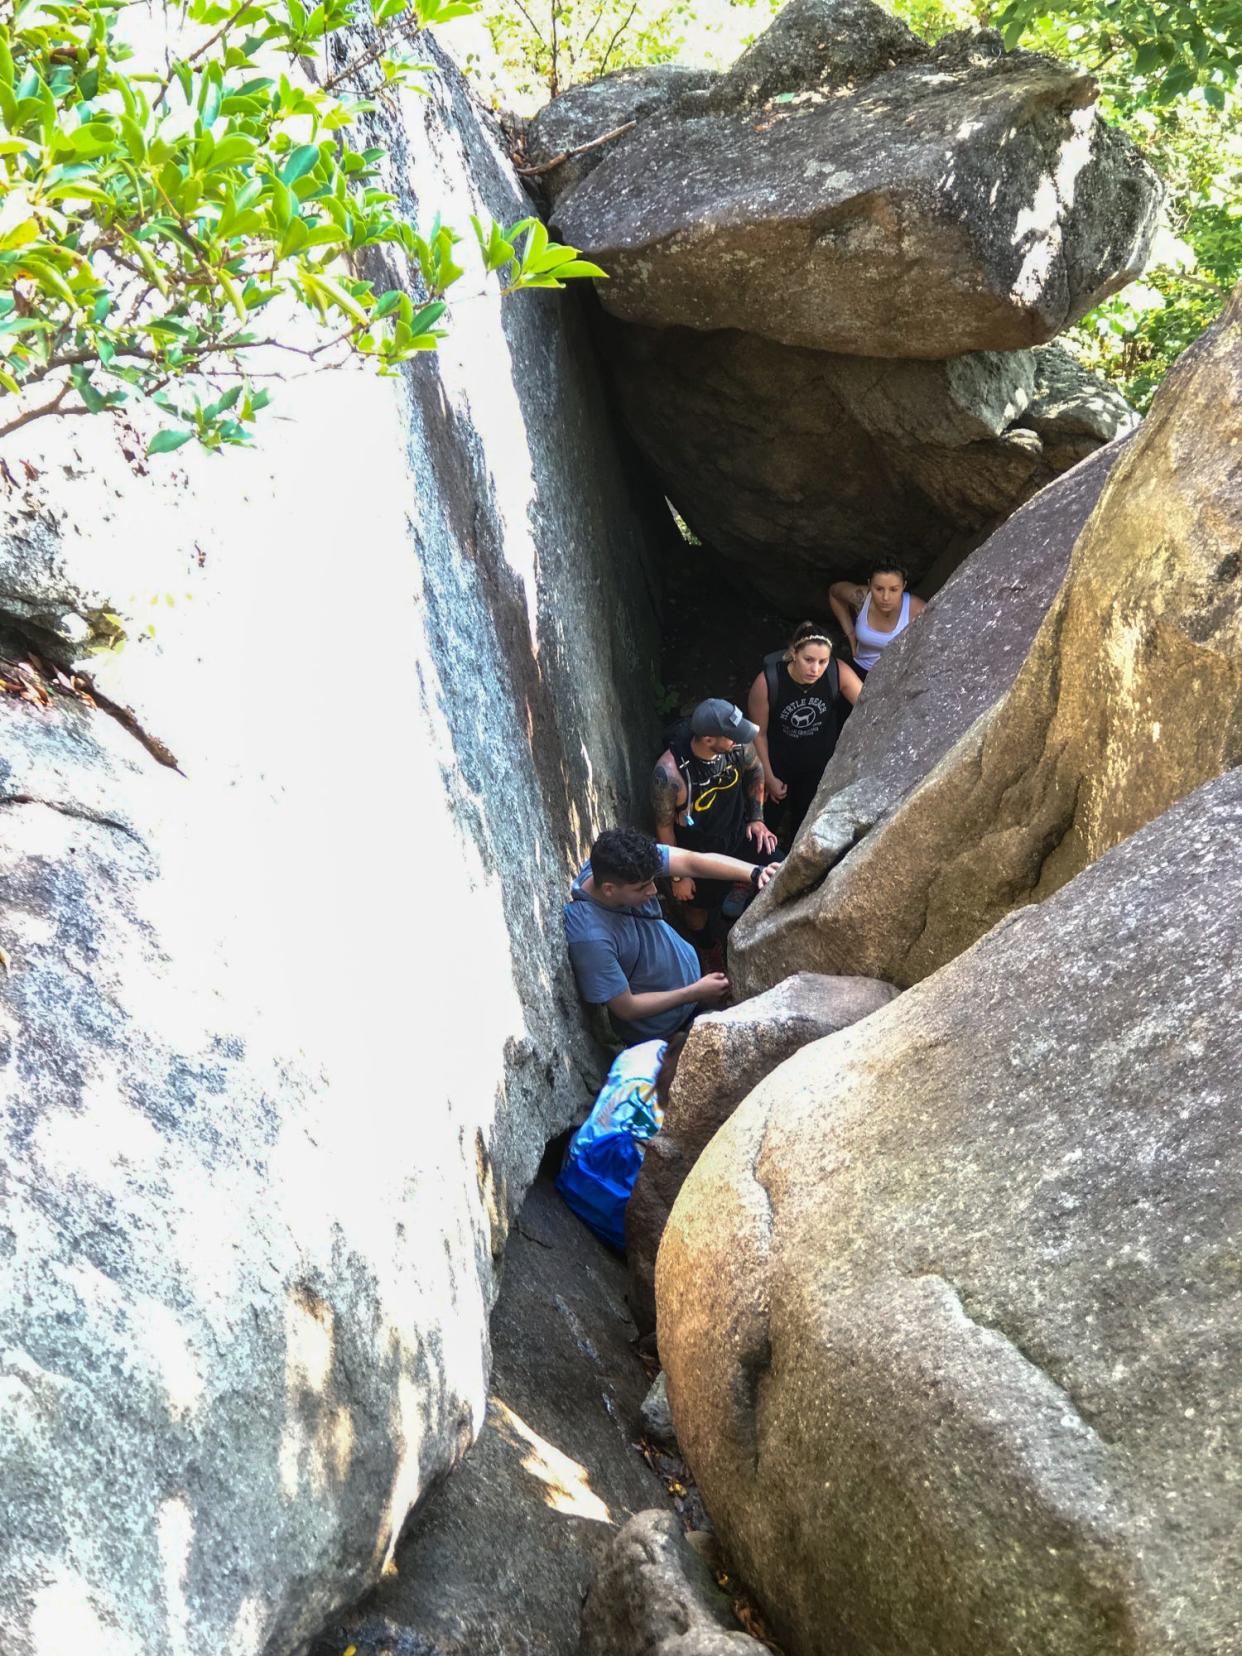 Hikers wait in line at the chute on the rock scramble portion of Old Rag Circuit Trail